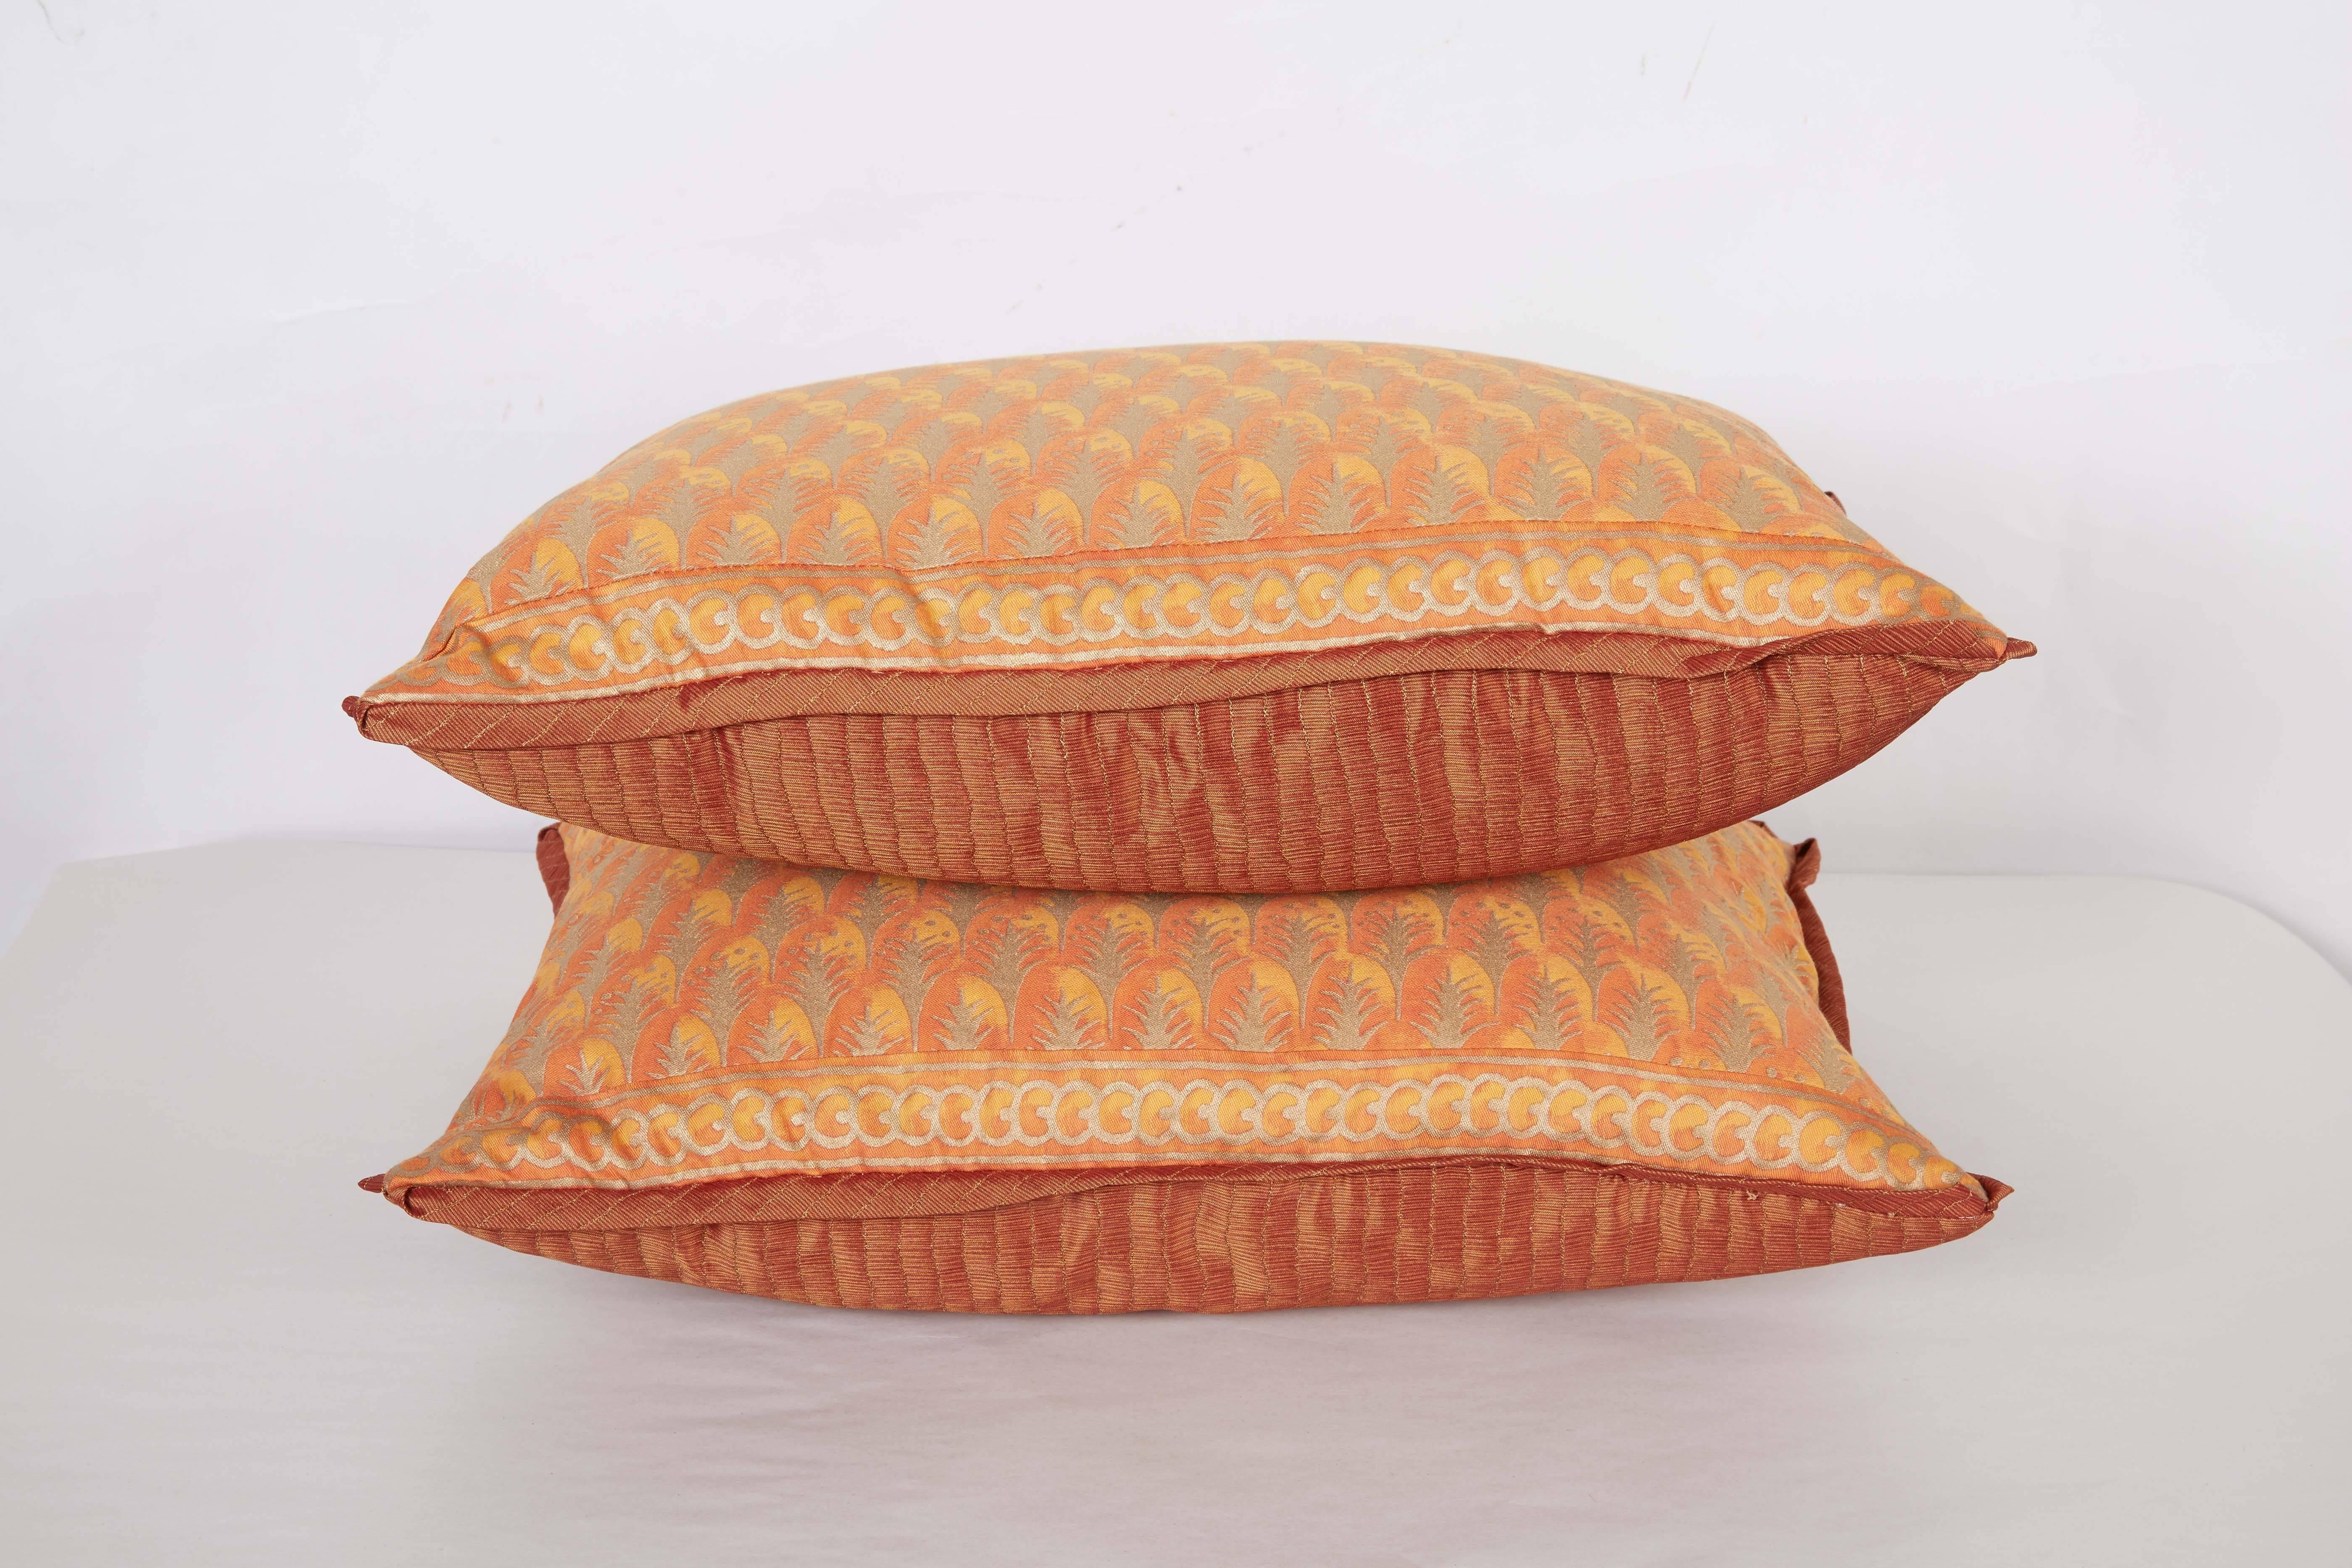 A pair of Fortuny fabric lumbar cushions in the Puimette pattern, apricot and silvery red color way, rouge taffeta backing with silk bias edging, the pattern inspired by an Egyptian motif. Newly made using vintage Fortuny fabric, circa 1960
50